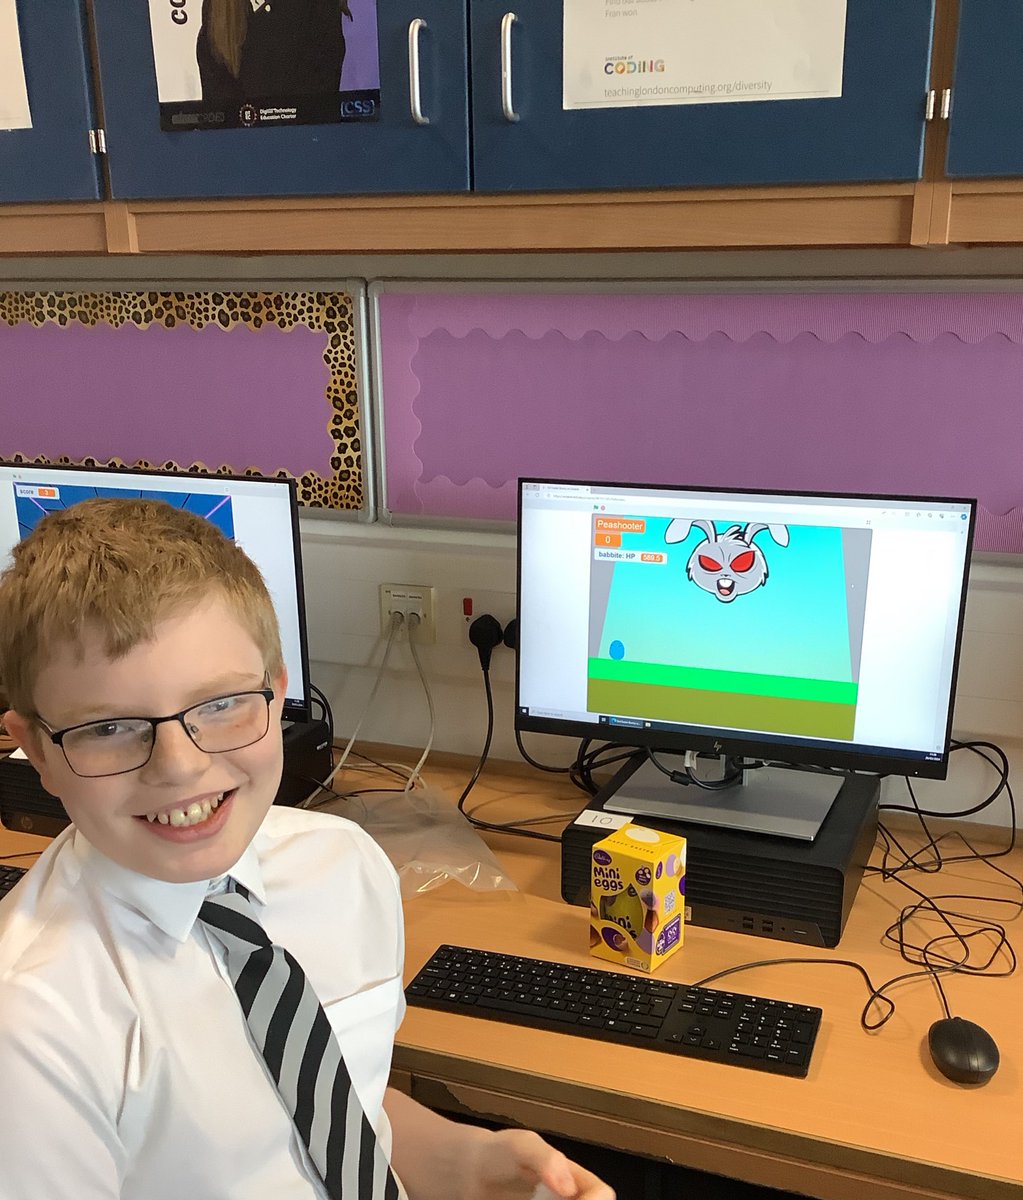 One of todays S1 scratch winners with his ‘Evil Easter Bunny’ game! #programmingskills #scratchprogramming